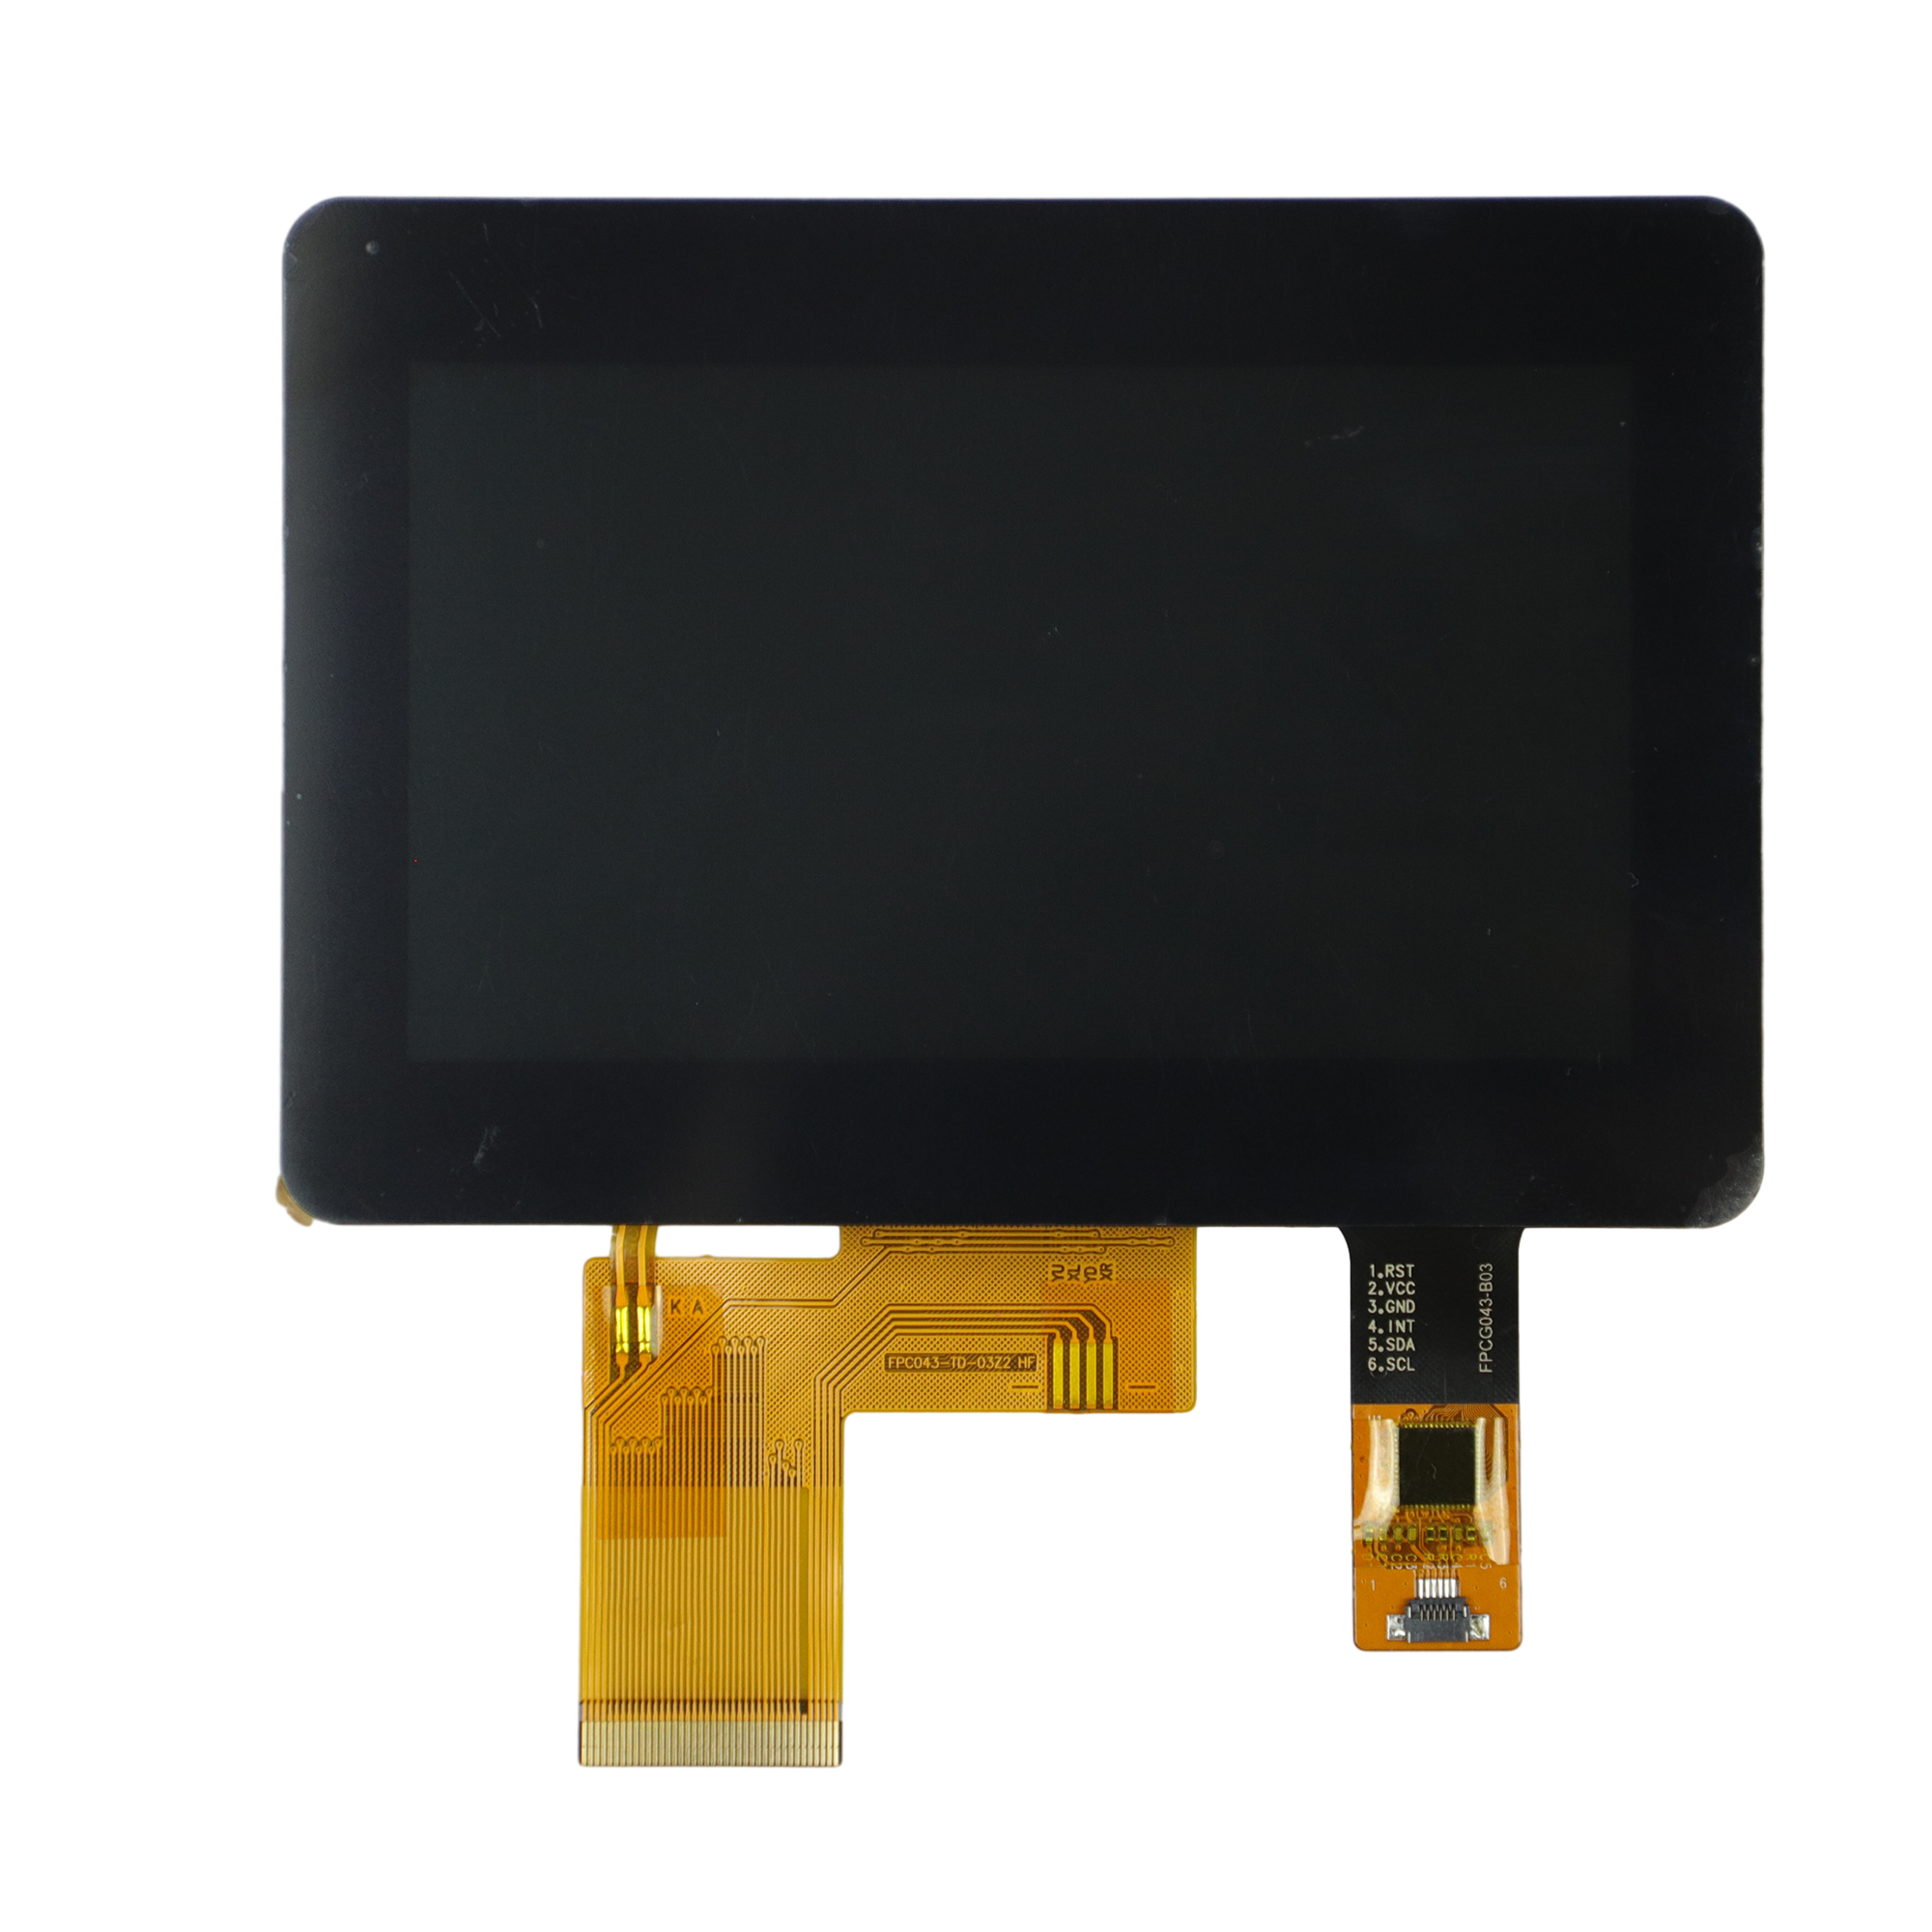 4.3 inch customized 480*272 TFT LCD display with RGB interface/4.3 inch TFT LCD module